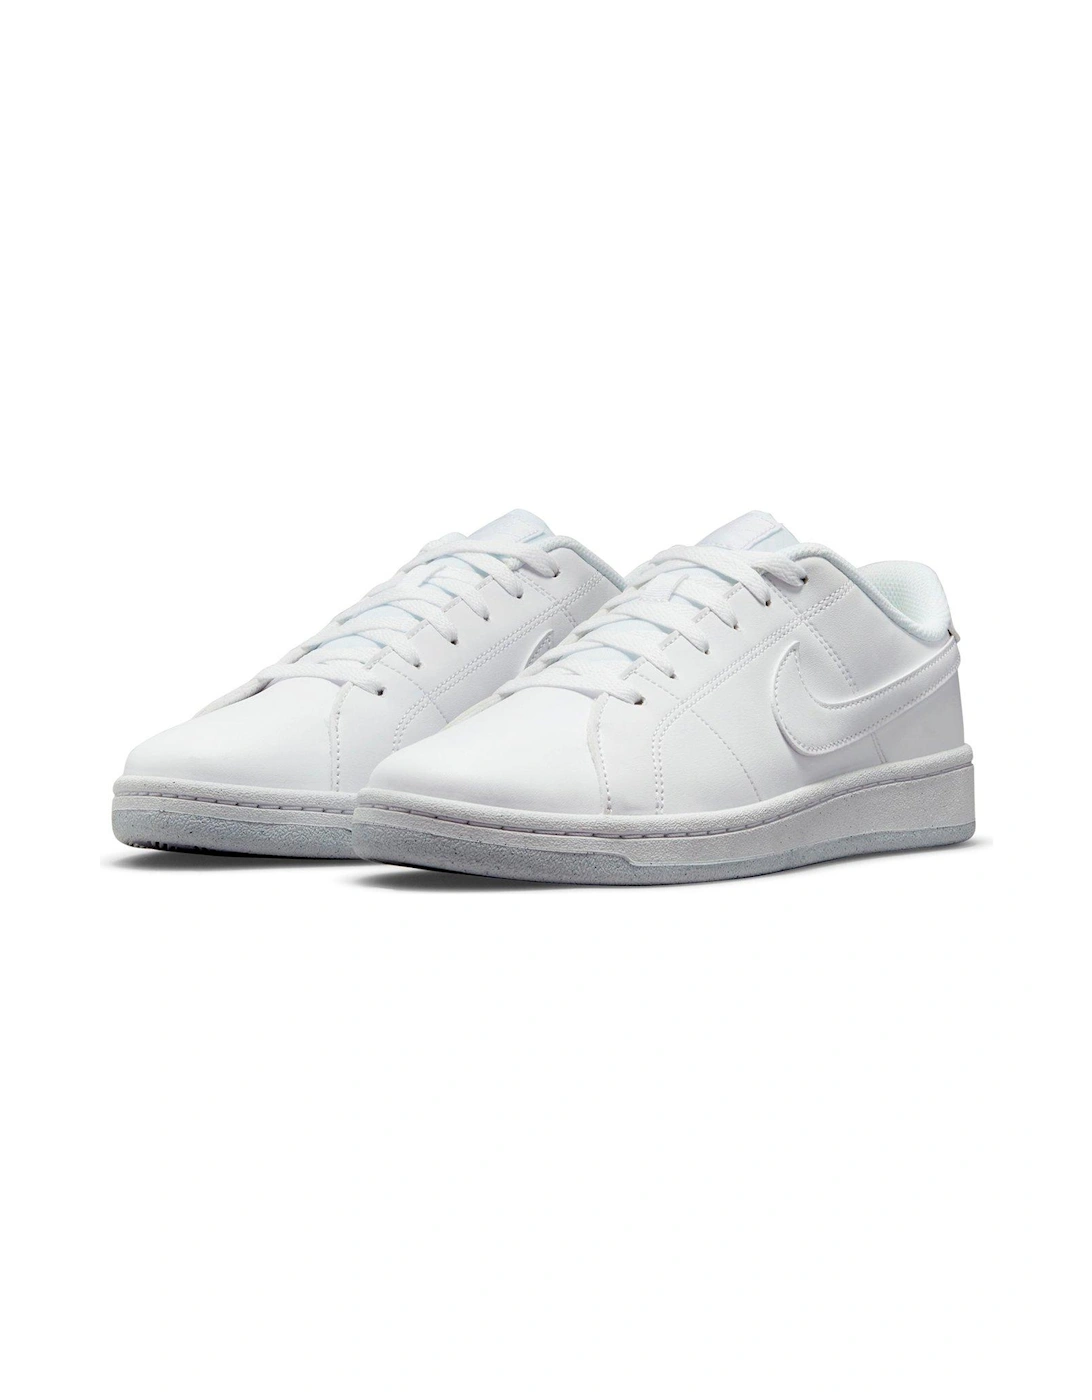 Court Royale 2 - White/Pale Blue, 8 of 7